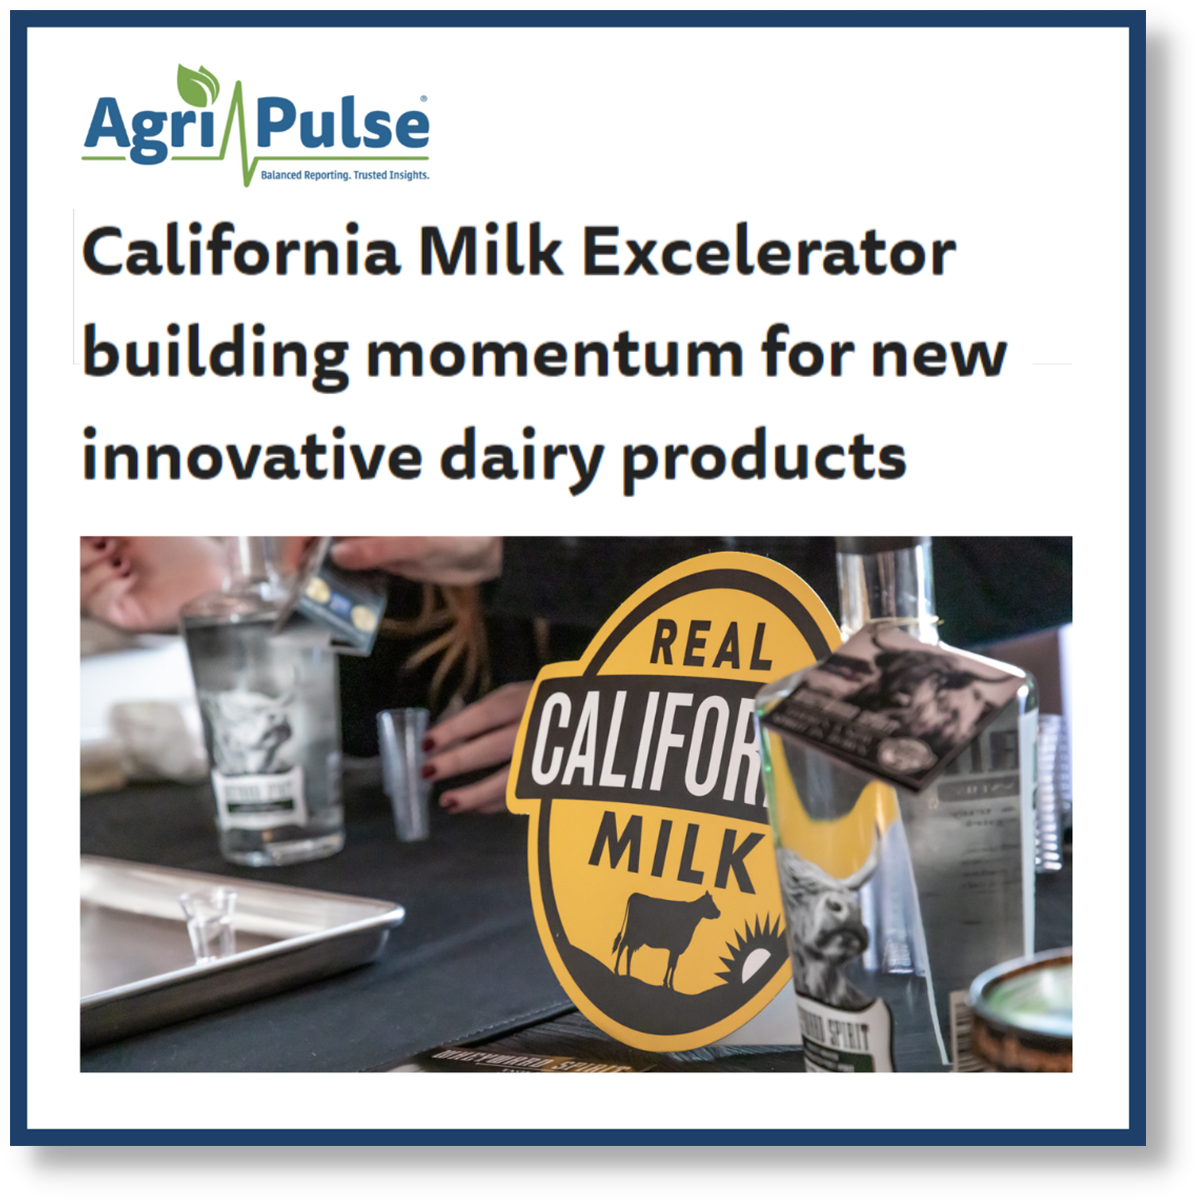 California Milk Excelerator building momentum for new innovative dairy products